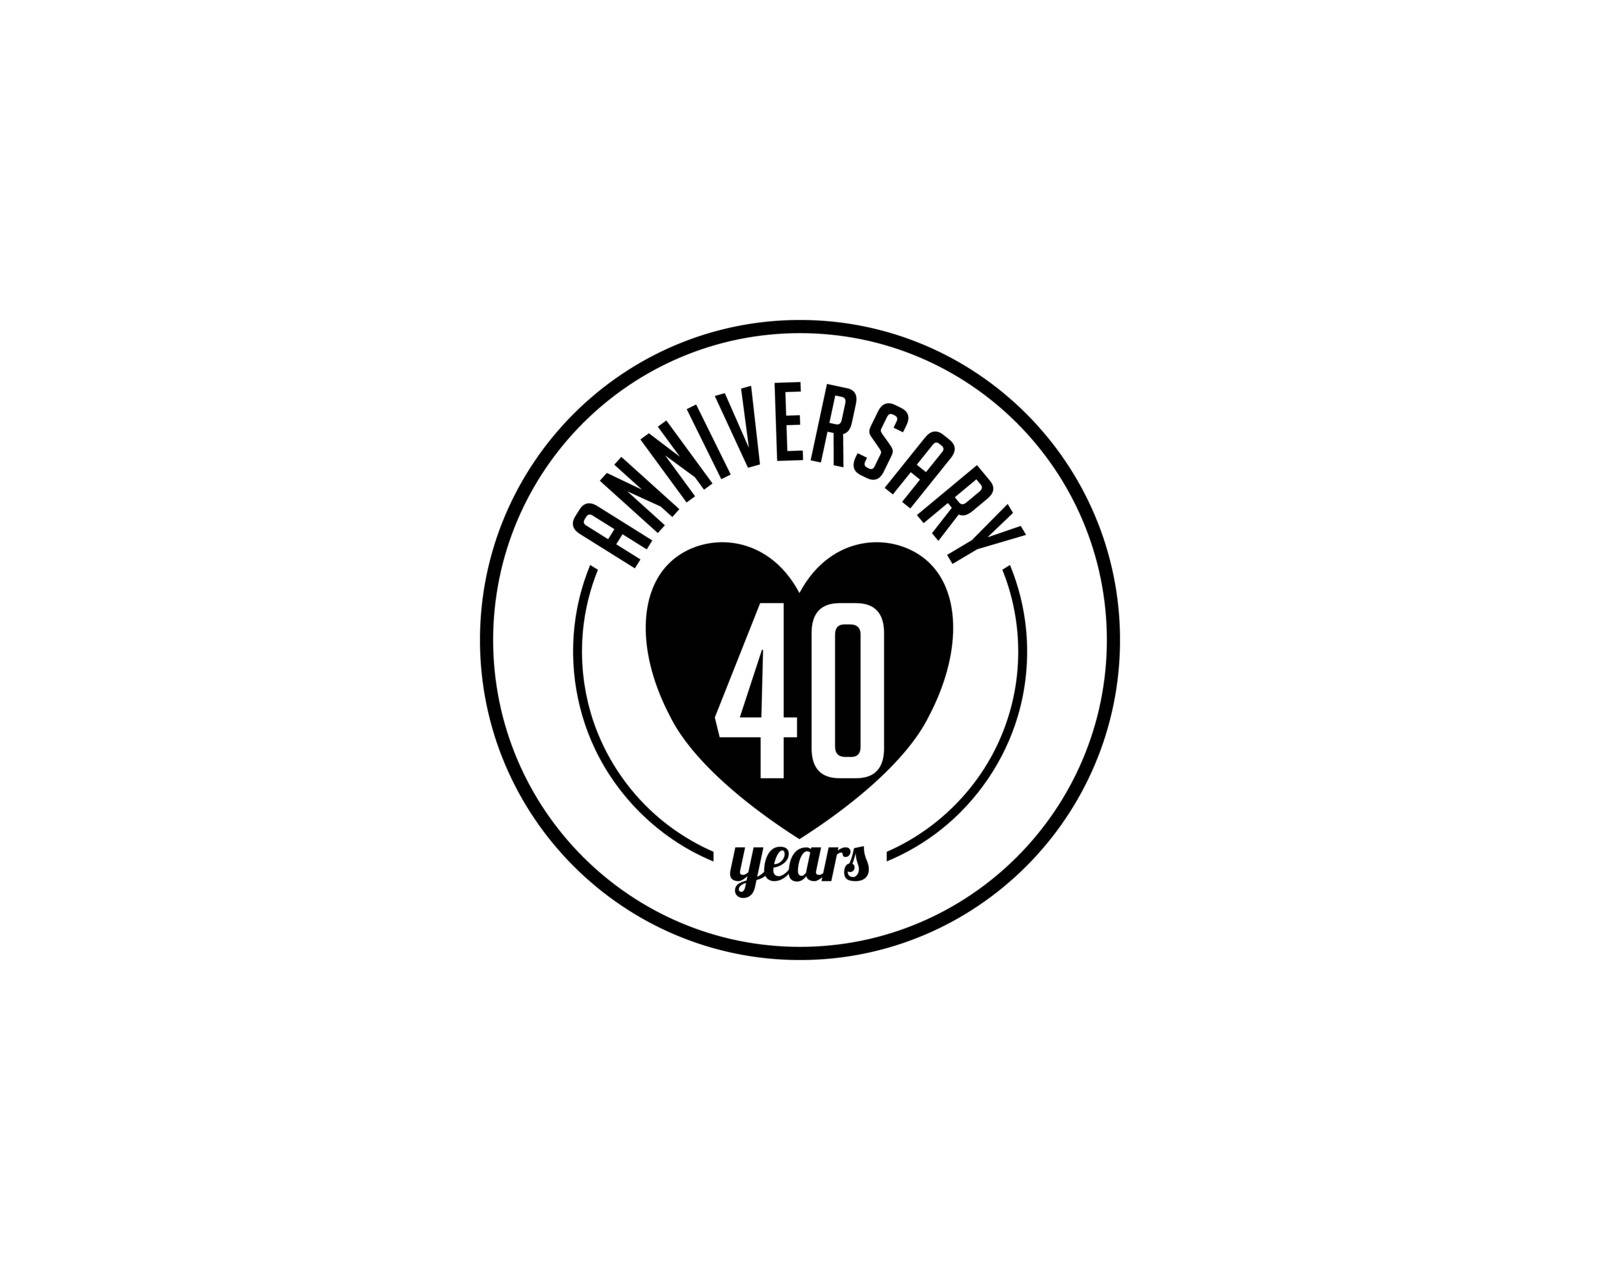 forty years anniversary badge by meisuseno